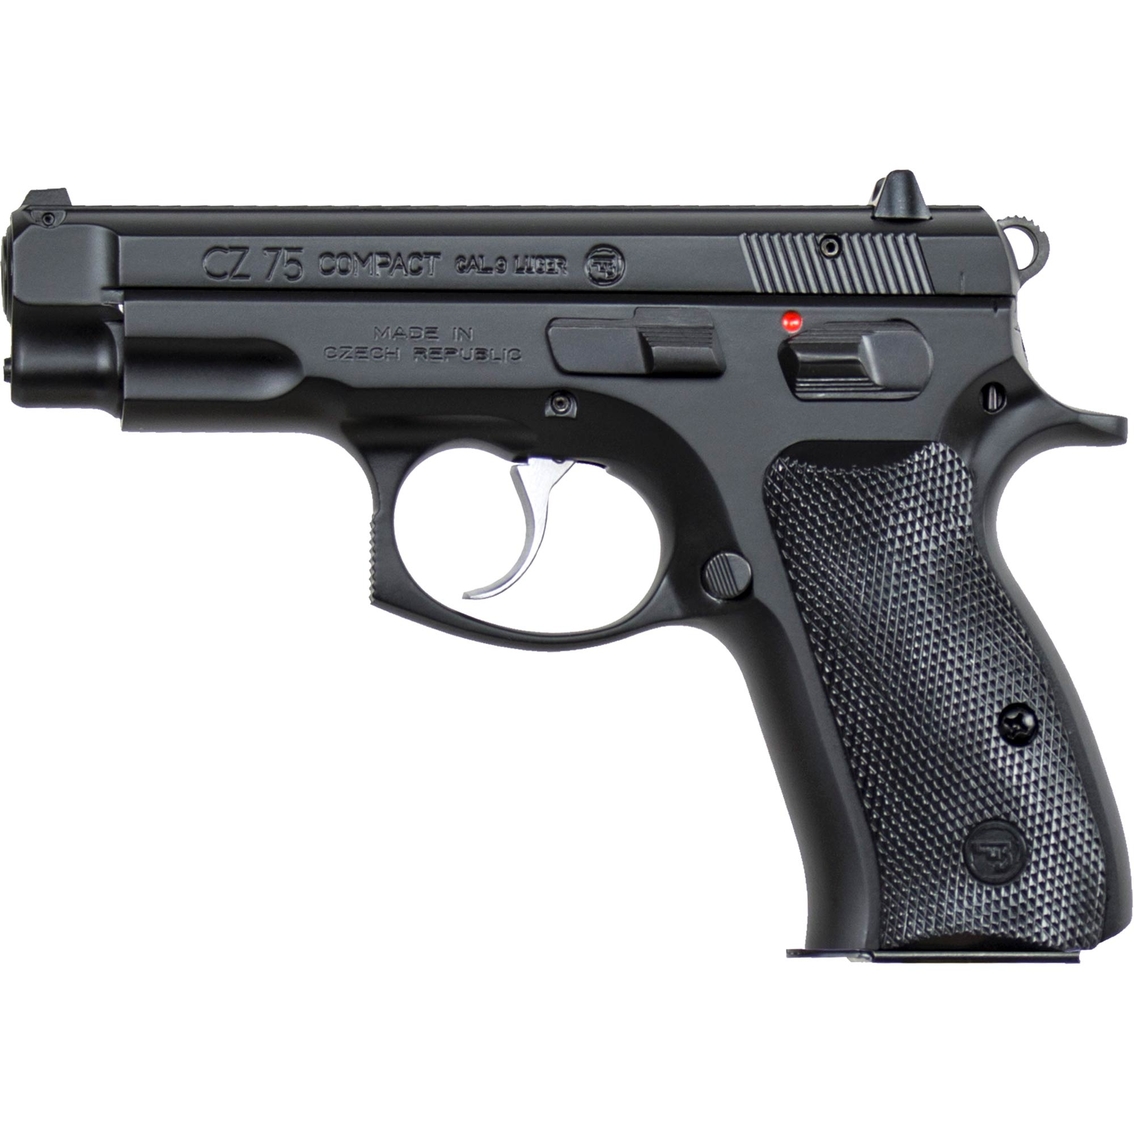 CZ 75 Compact 9MM 3.7 in. Barrel 10 Rds 2-Mags Pistol Black - Image 2 of 2